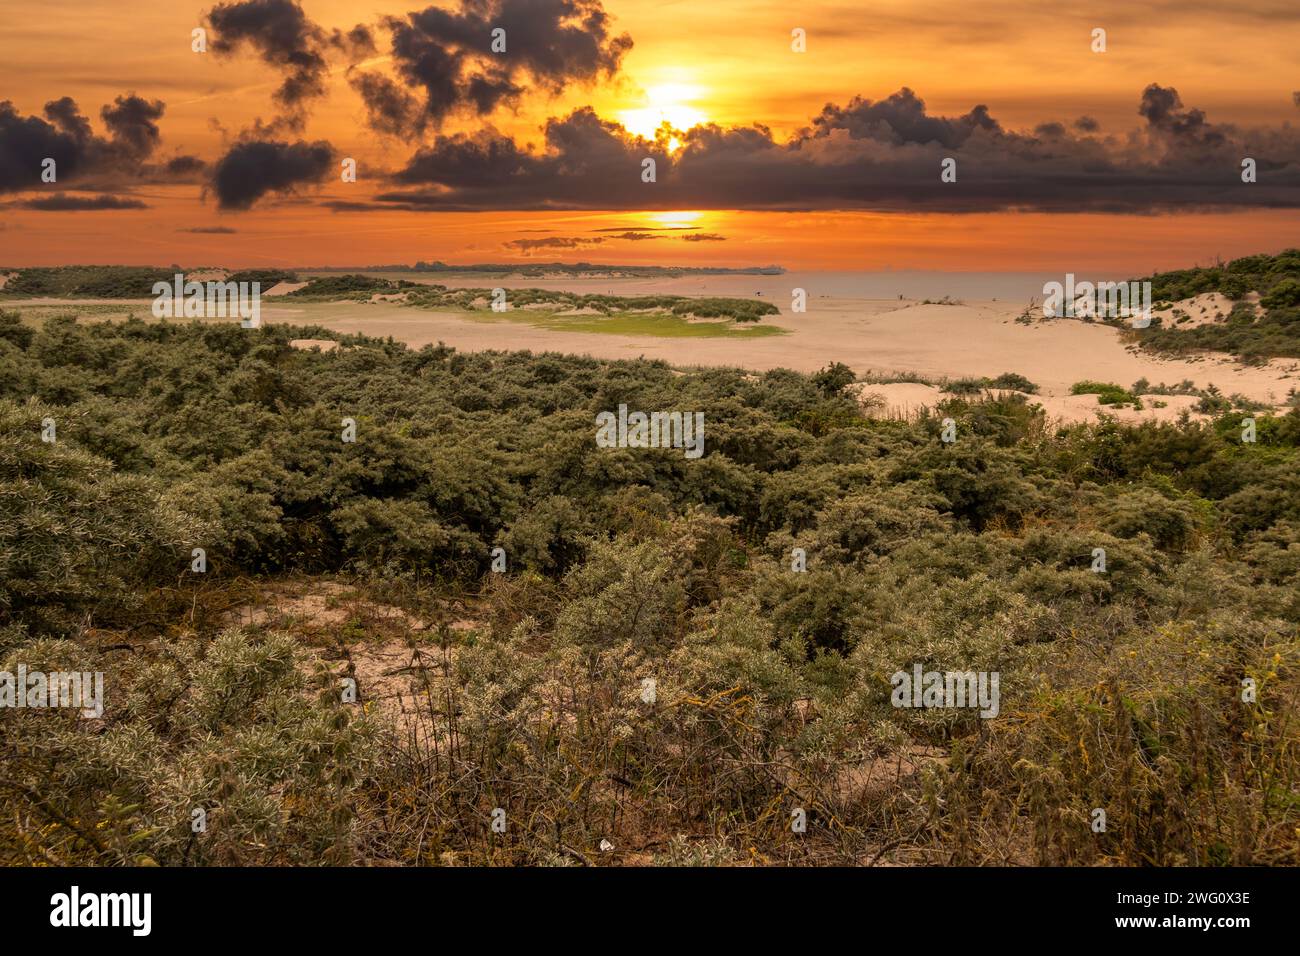 Dunes and beach of tidal inlet of The Zwin nature reserve at North Sea coast at sunset, at border between Belgium and the Netherlands Stock Photo